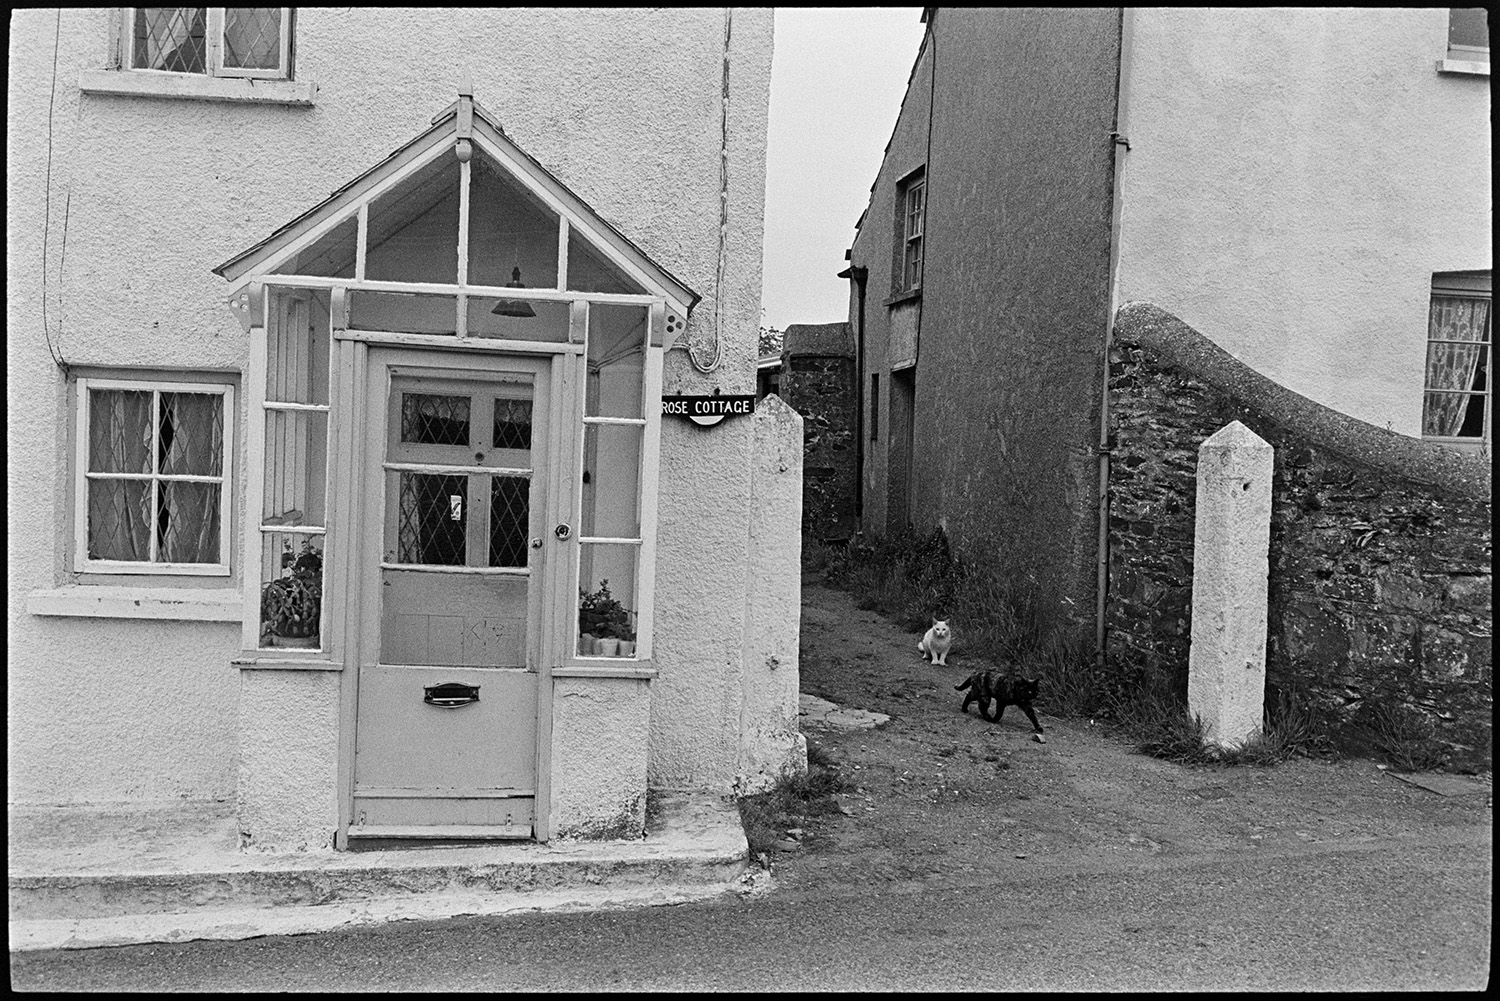 Cottage with porch. 
[The porch and front door of Rose Cottage, West Lane, Dolton. Two cats are in the alley next to the house.]